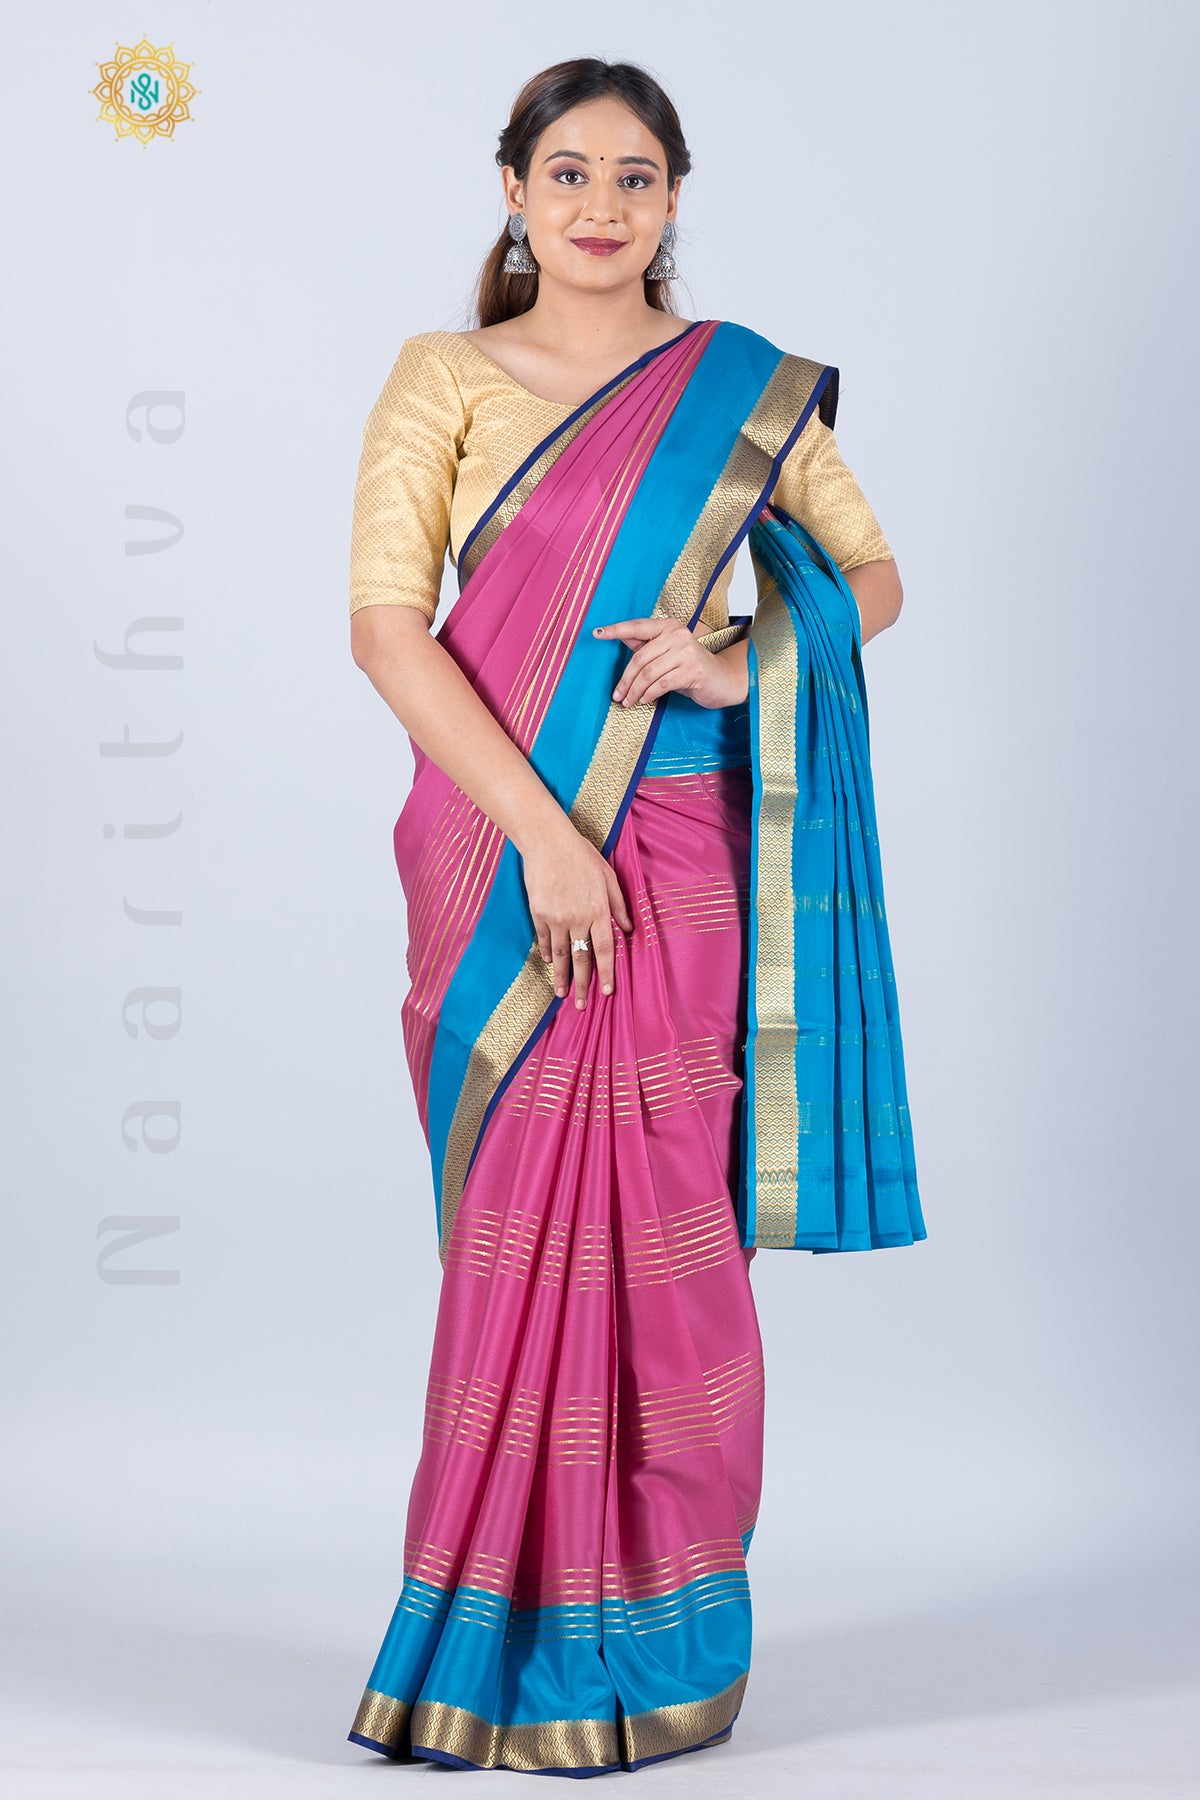 PINK WITH BLUE - PURE MYSORE CREPE SILK WITH GOLD ZARI IN 3D PATTERN